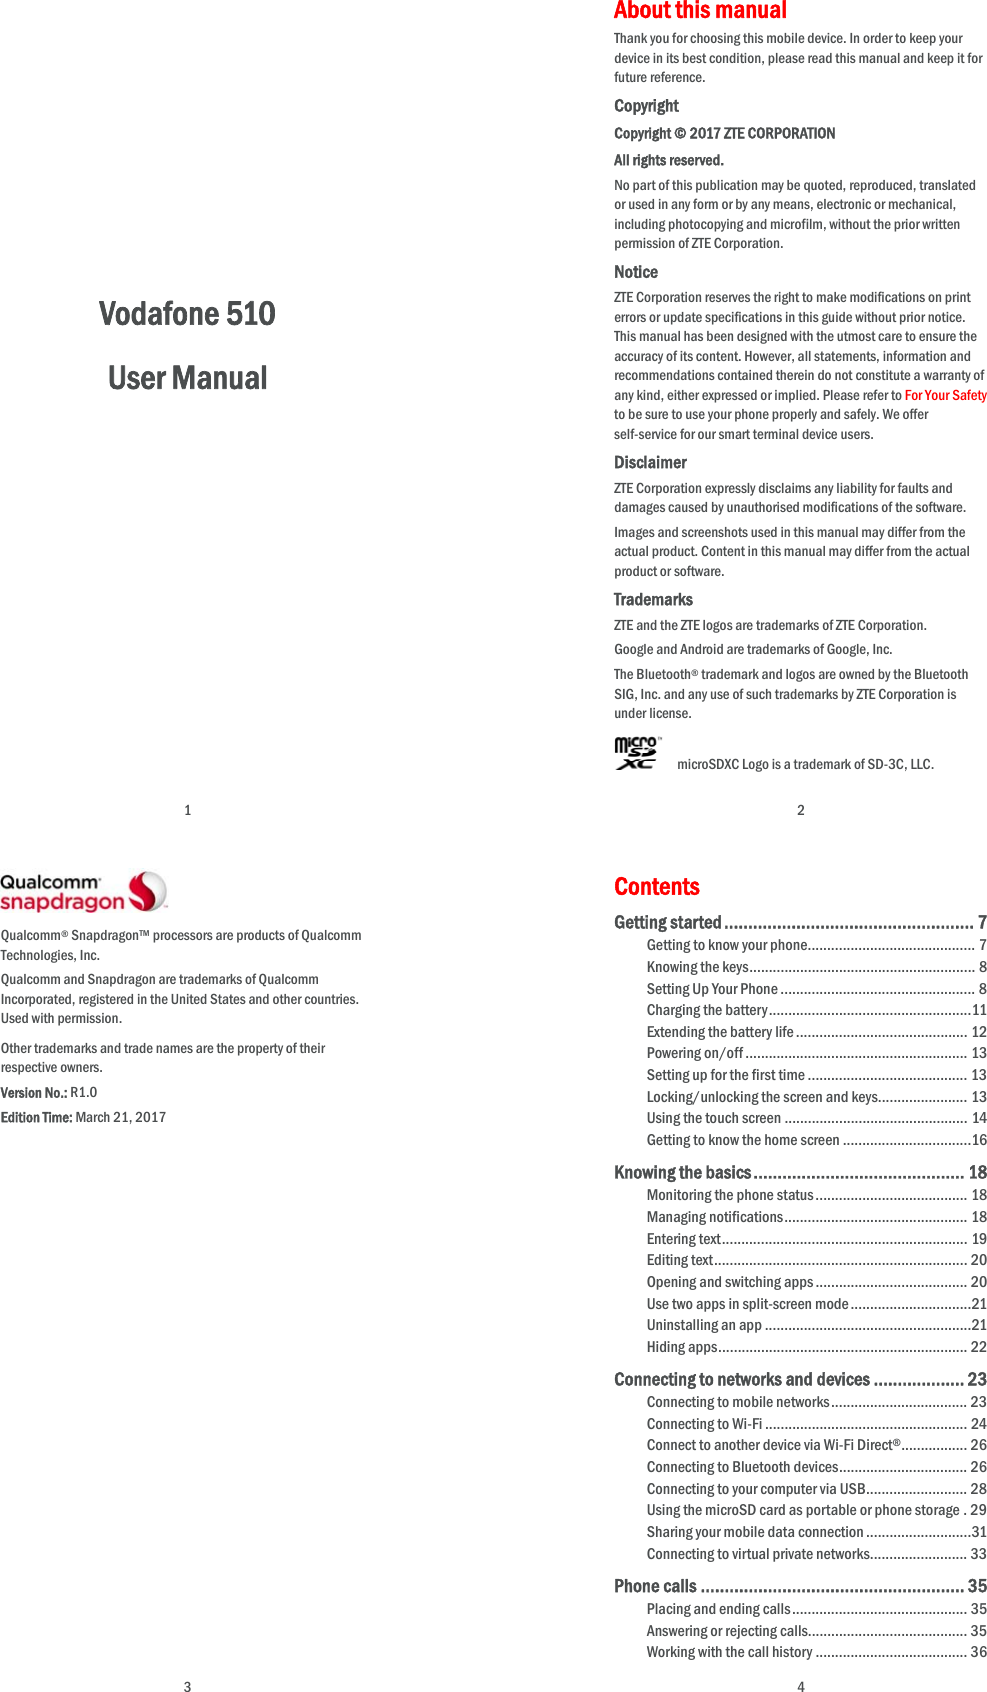  1             Vodafone 510 User Manual    2 About this manual Thank you for choosing this mobile device. In order to keep your device in its best condition, please read this manual and keep it for future reference. Copyright Copyright © 2017 ZTE CORPORATION All rights reserved. No part of this publication may be quoted, reproduced, translated or used in any form or by any means, electronic or mechanical, including photocopying and microfilm, without the prior written permission of ZTE Corporation. Notice ZTE Corporation reserves the right to make modifications on print errors or update specifications in this guide without prior notice. This manual has been designed with the utmost care to ensure the accuracy of its content. However, all statements, information and recommendations contained therein do not constitute a warranty of any kind, either expressed or implied. Please refer to For Your Safety to be sure to use your phone properly and safely. We offer self-service for our smart terminal device users.   Disclaimer ZTE Corporation expressly disclaims any liability for faults and damages caused by unauthorised modifications of the software. Images and screenshots used in this manual may differ from the actual product. Content in this manual may differ from the actual product or software. Trademarks ZTE and the ZTE logos are trademarks of ZTE Corporation. Google and Android are trademarks of Google, Inc.   The Bluetooth® trademark and logos are owned by the Bluetooth SIG, Inc. and any use of such trademarks by ZTE Corporation is under license.       microSDXC Logo is a trademark of SD-3C, LLC.  3  Qualcomm® Snapdragon™ processors are products of Qualcomm Technologies, Inc.   Qualcomm and Snapdragon are trademarks of Qualcomm Incorporated, registered in the United States and other countries. Used with permission. Other trademarks and trade names are the property of their respective owners. Version No.: R1.0 Edition Time: March 21, 2017   4 Contents Getting started .................................................... 7Getting to know your phone ........................................... 7Knowing the keys .......................................................... 8Setting Up Your Phone .................................................. 8Charging the battery ....................................................11Extending the battery life ............................................ 12Powering on/off ......................................................... 13Setting up for the first time ......................................... 13Locking/unlocking the screen and keys ....................... 13Using the touch screen ............................................... 14Getting to know the home screen .................................16Knowing the basics ............................................ 18Monitoring the phone status ....................................... 18Managing notifications ............................................... 18Entering text ............................................................... 19Editing text ................................................................. 20Opening and switching apps ....................................... 20Use two apps in split-screen mode ...............................21Uninstalling an app .....................................................21Hiding apps ................................................................ 22Connecting to networks and devices ................... 23Connecting to mobile networks ................................... 23Connecting to Wi-Fi .................................................... 24Connect to another device via Wi-Fi Direct® .................  26Connecting to Bluetooth devices ................................. 26Connecting to your computer via USB .......................... 28Using the microSD card as portable or phone storage . 29Sharing your mobile data connection ........................... 31Connecting to virtual private networks ......................... 33Phone calls ....................................................... 35Placing and ending calls ............................................. 35Answering or rejecting calls......................................... 35Working with the call history ....................................... 36